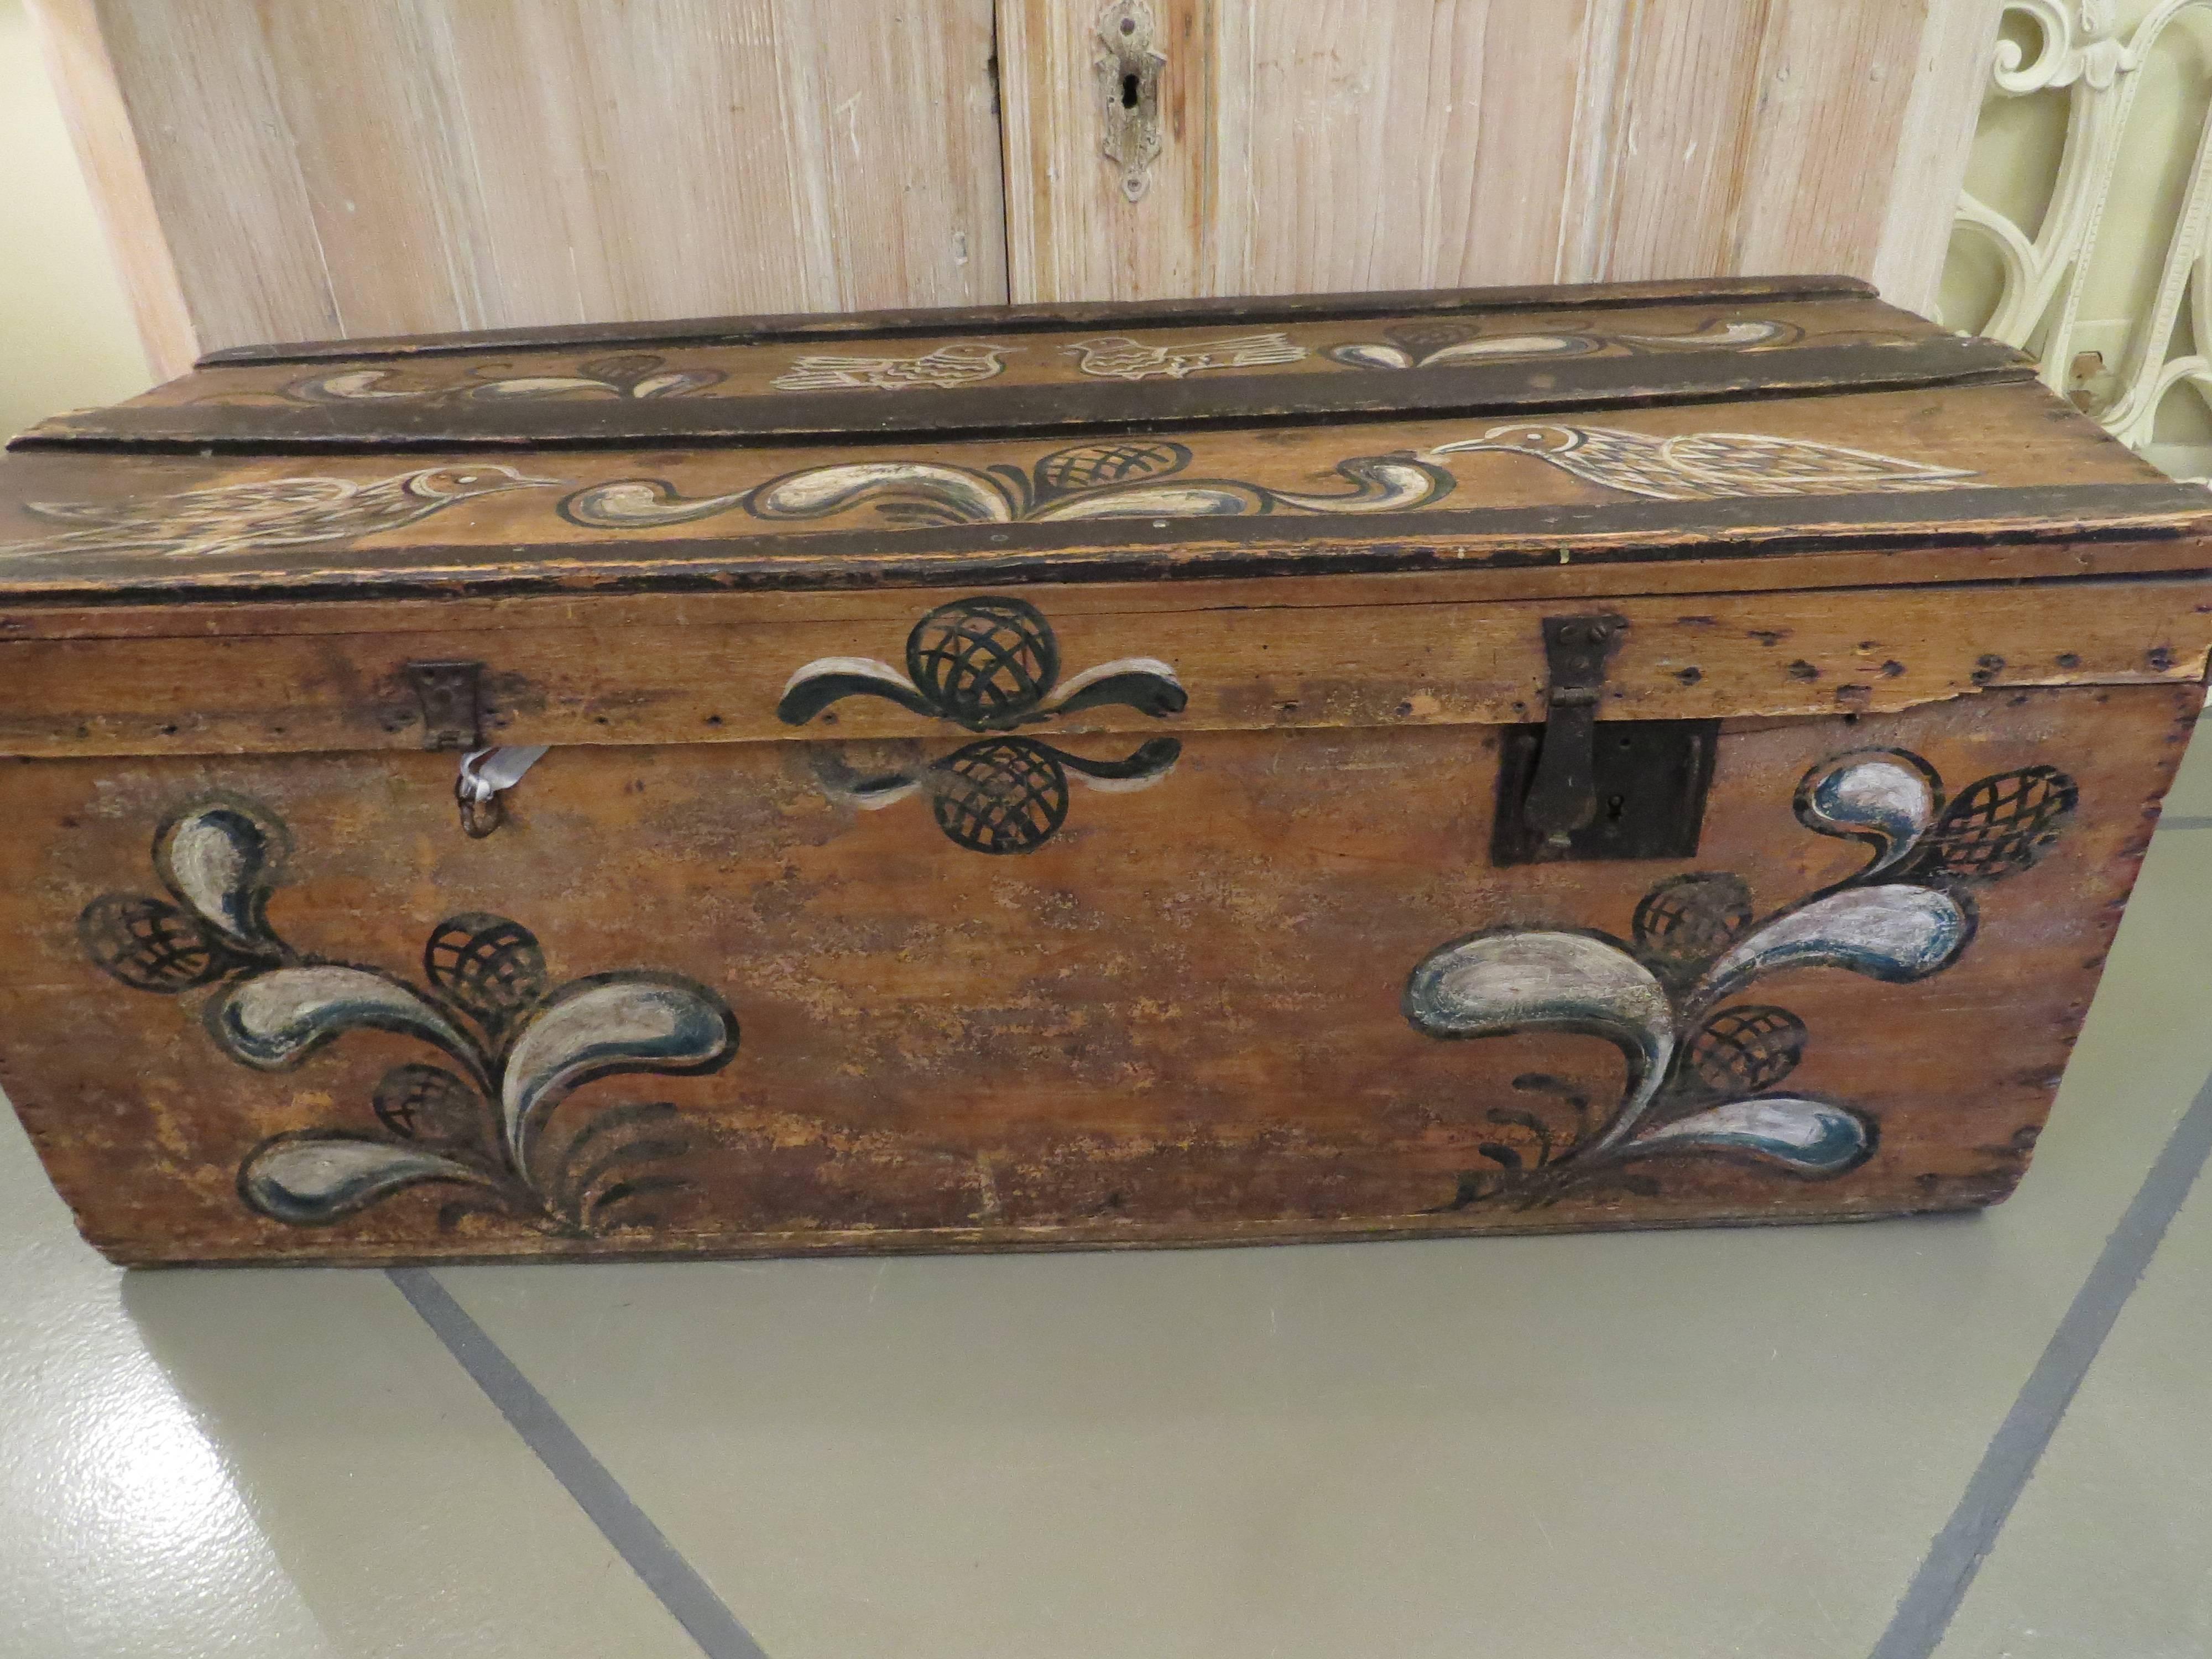 This Swedish trunk is painted with birds and flowers. It is made of wood with iron handles. It is from the 19th century.